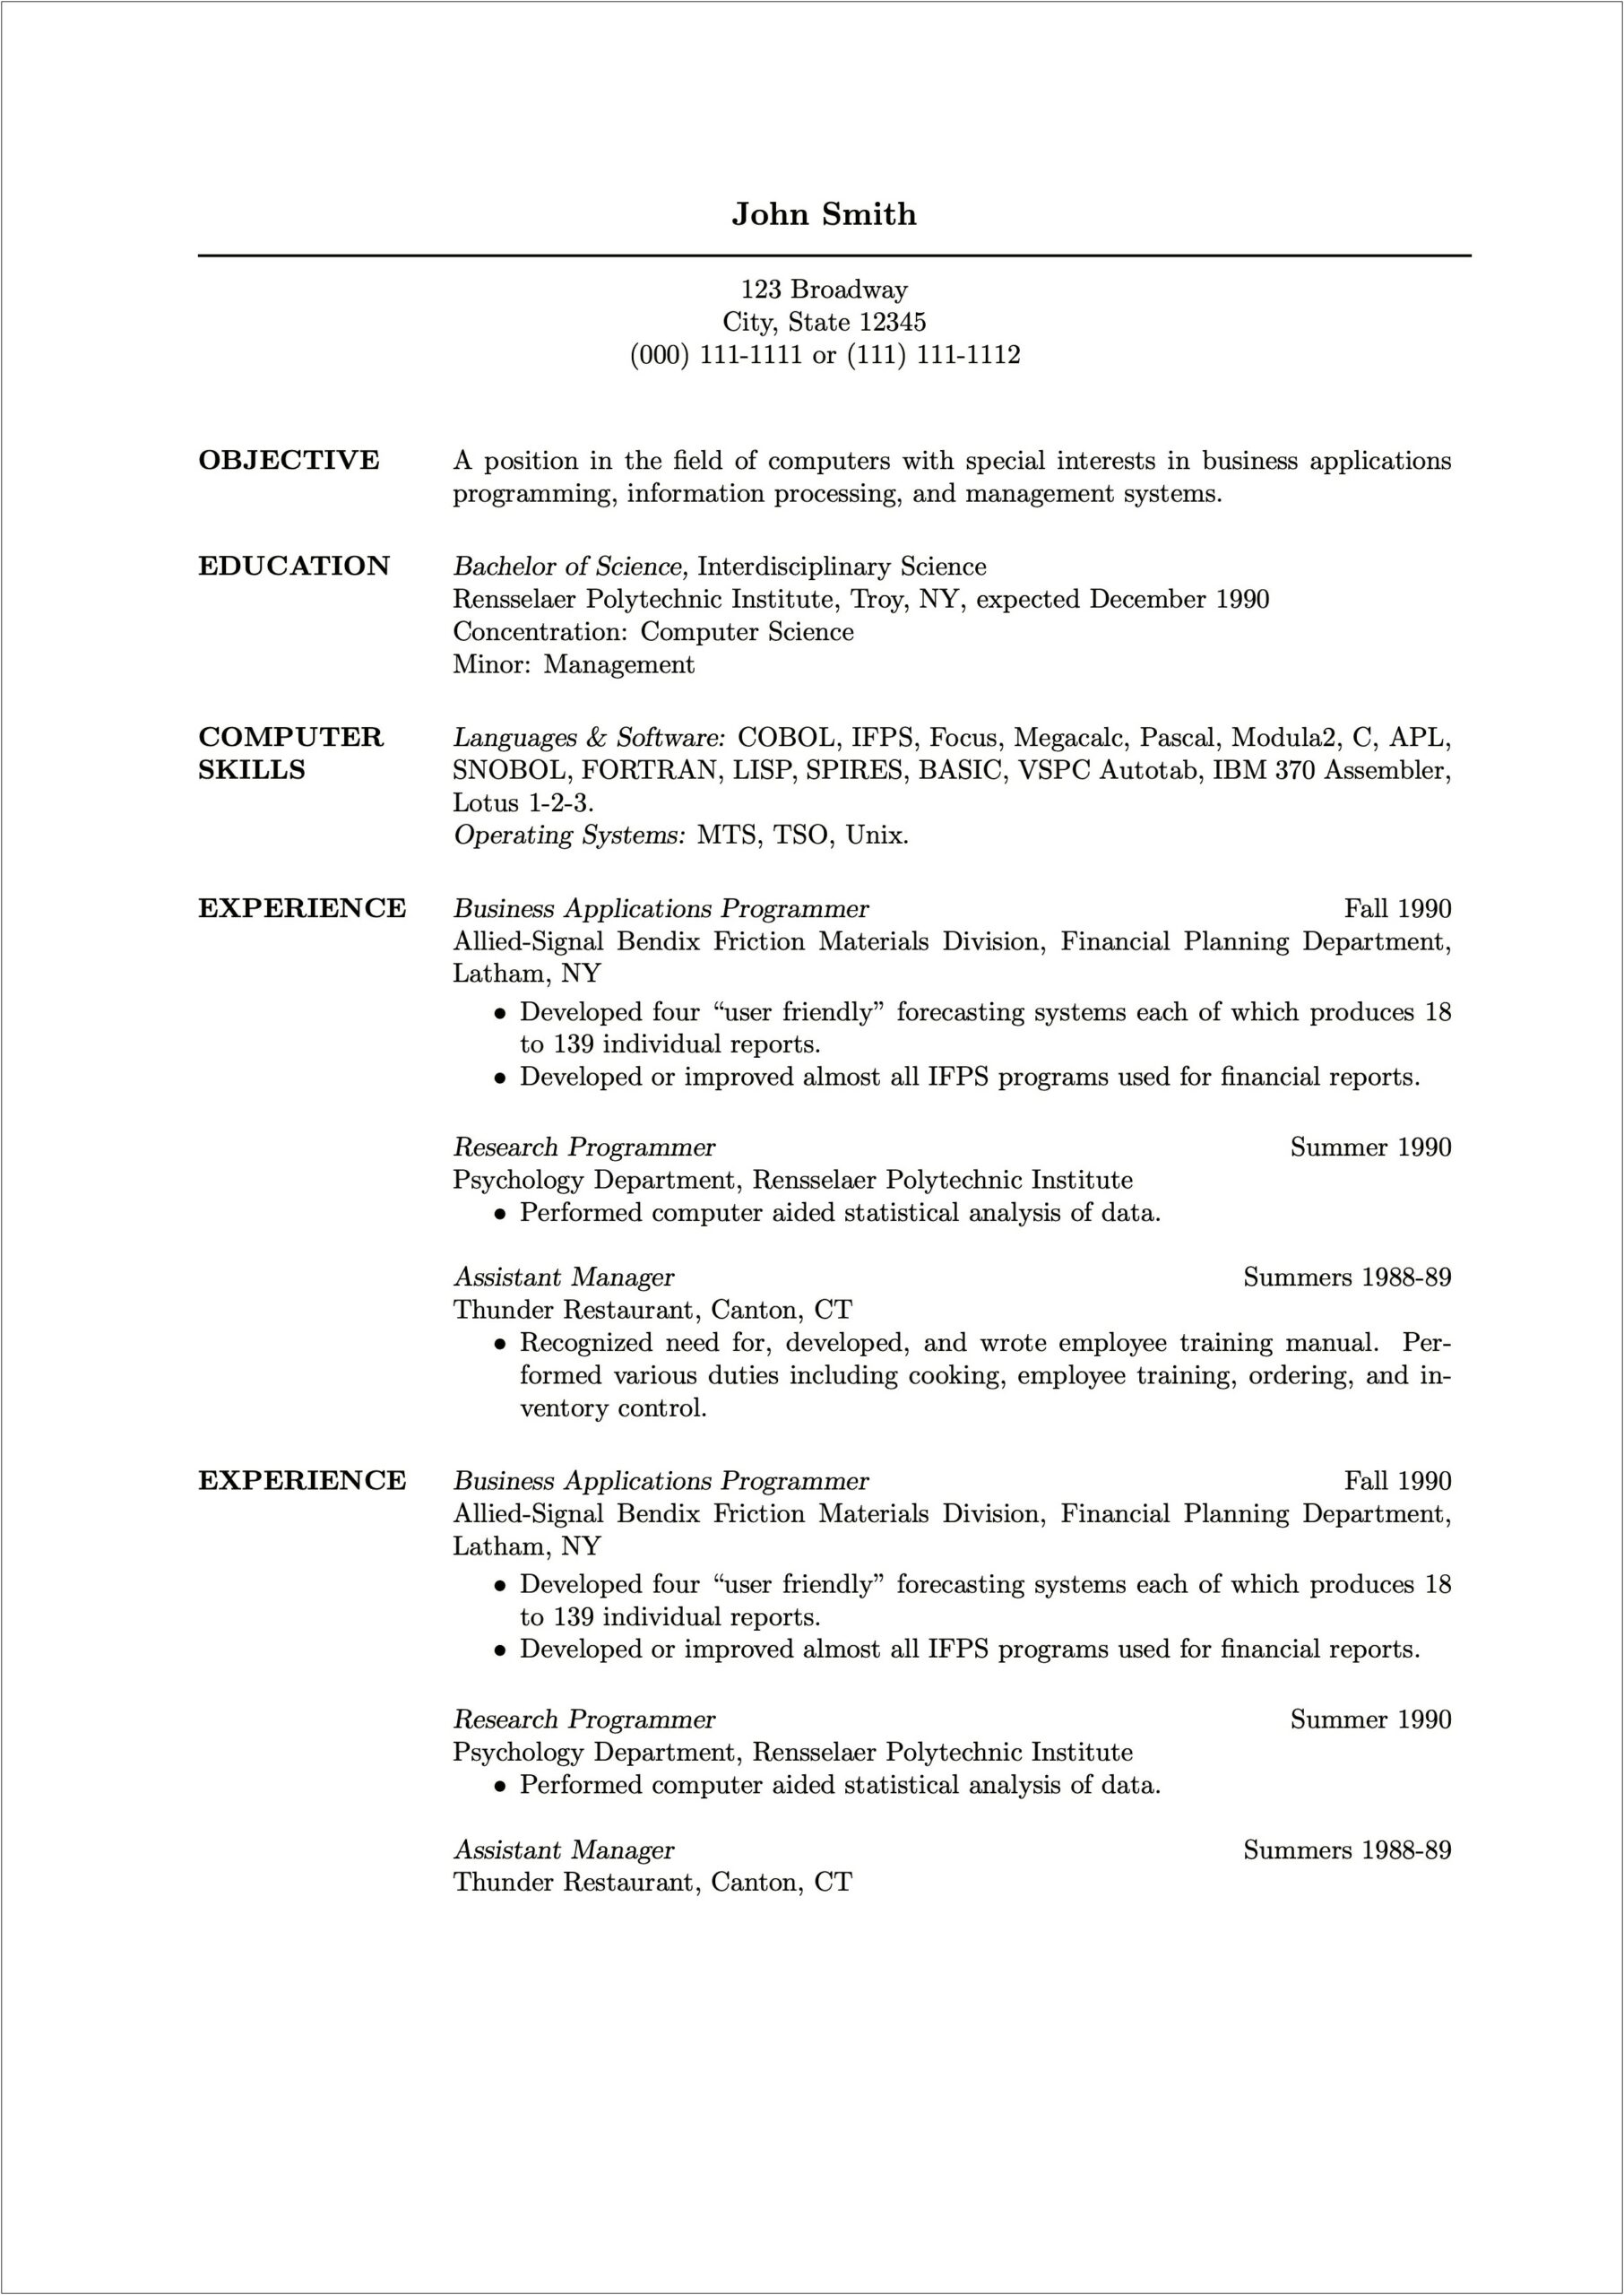 Are Summary Lines Necessary In Resumes